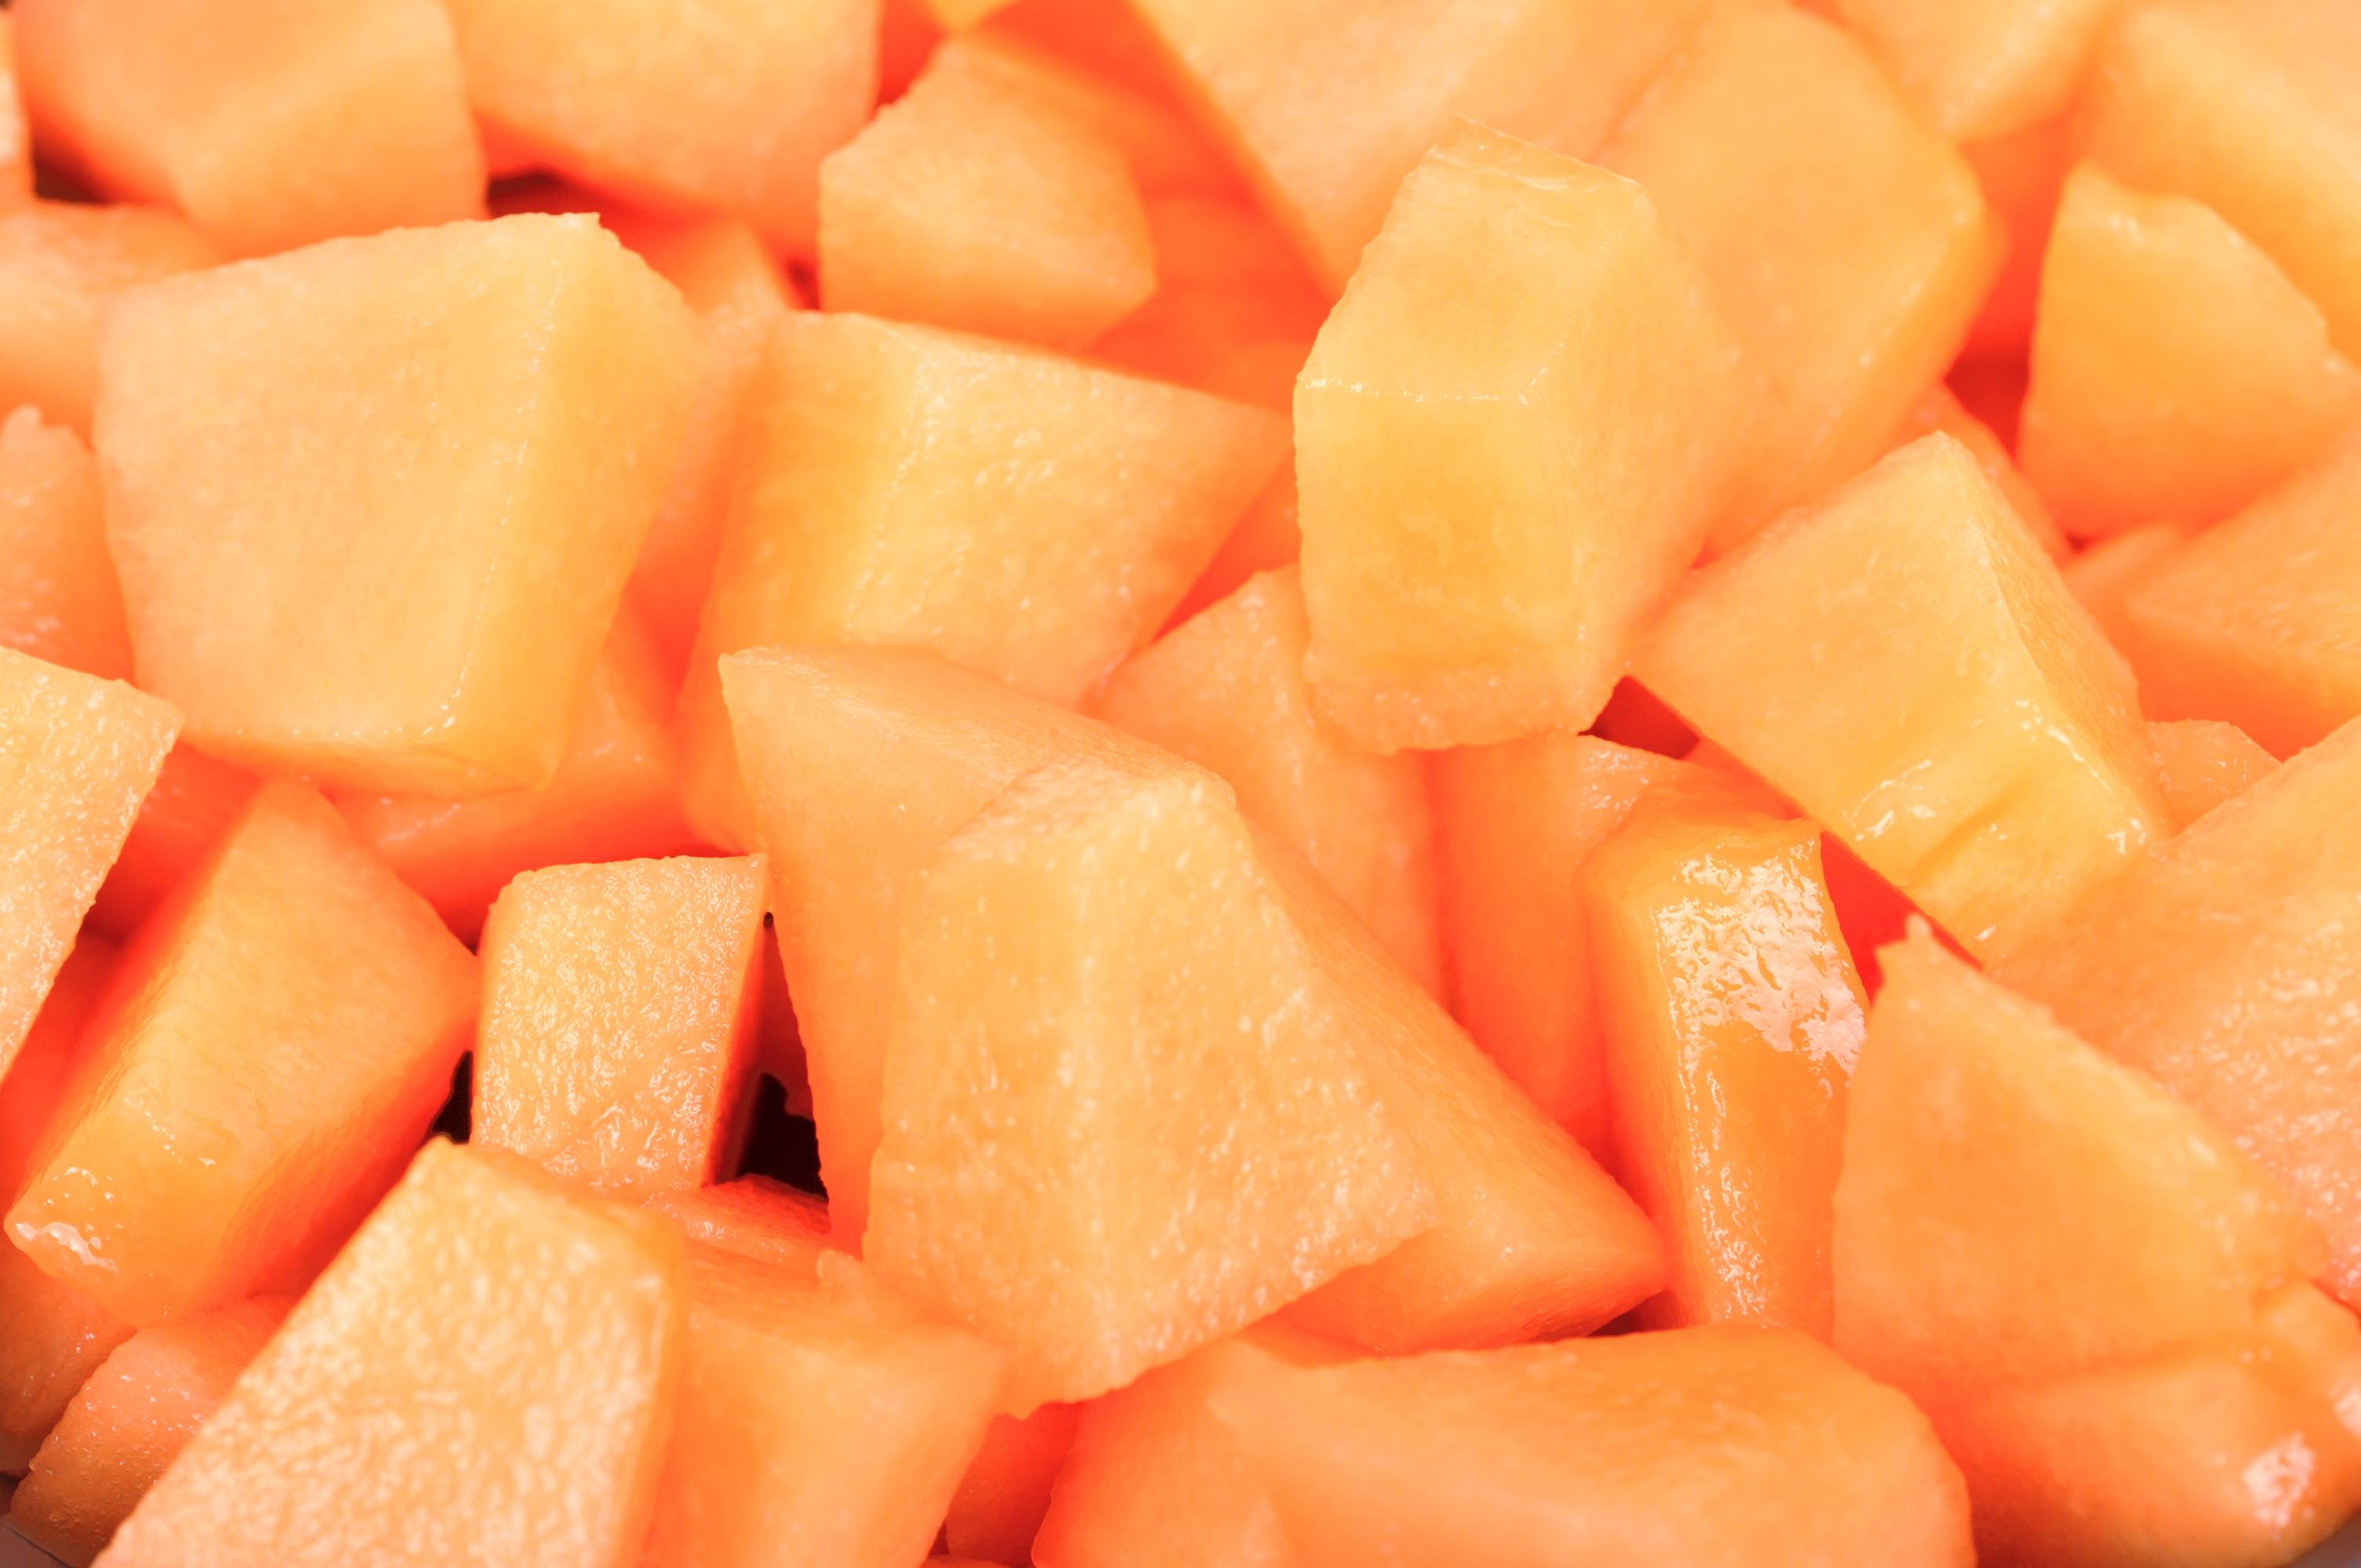 close up of chopped up and pre-cut melon, fruit